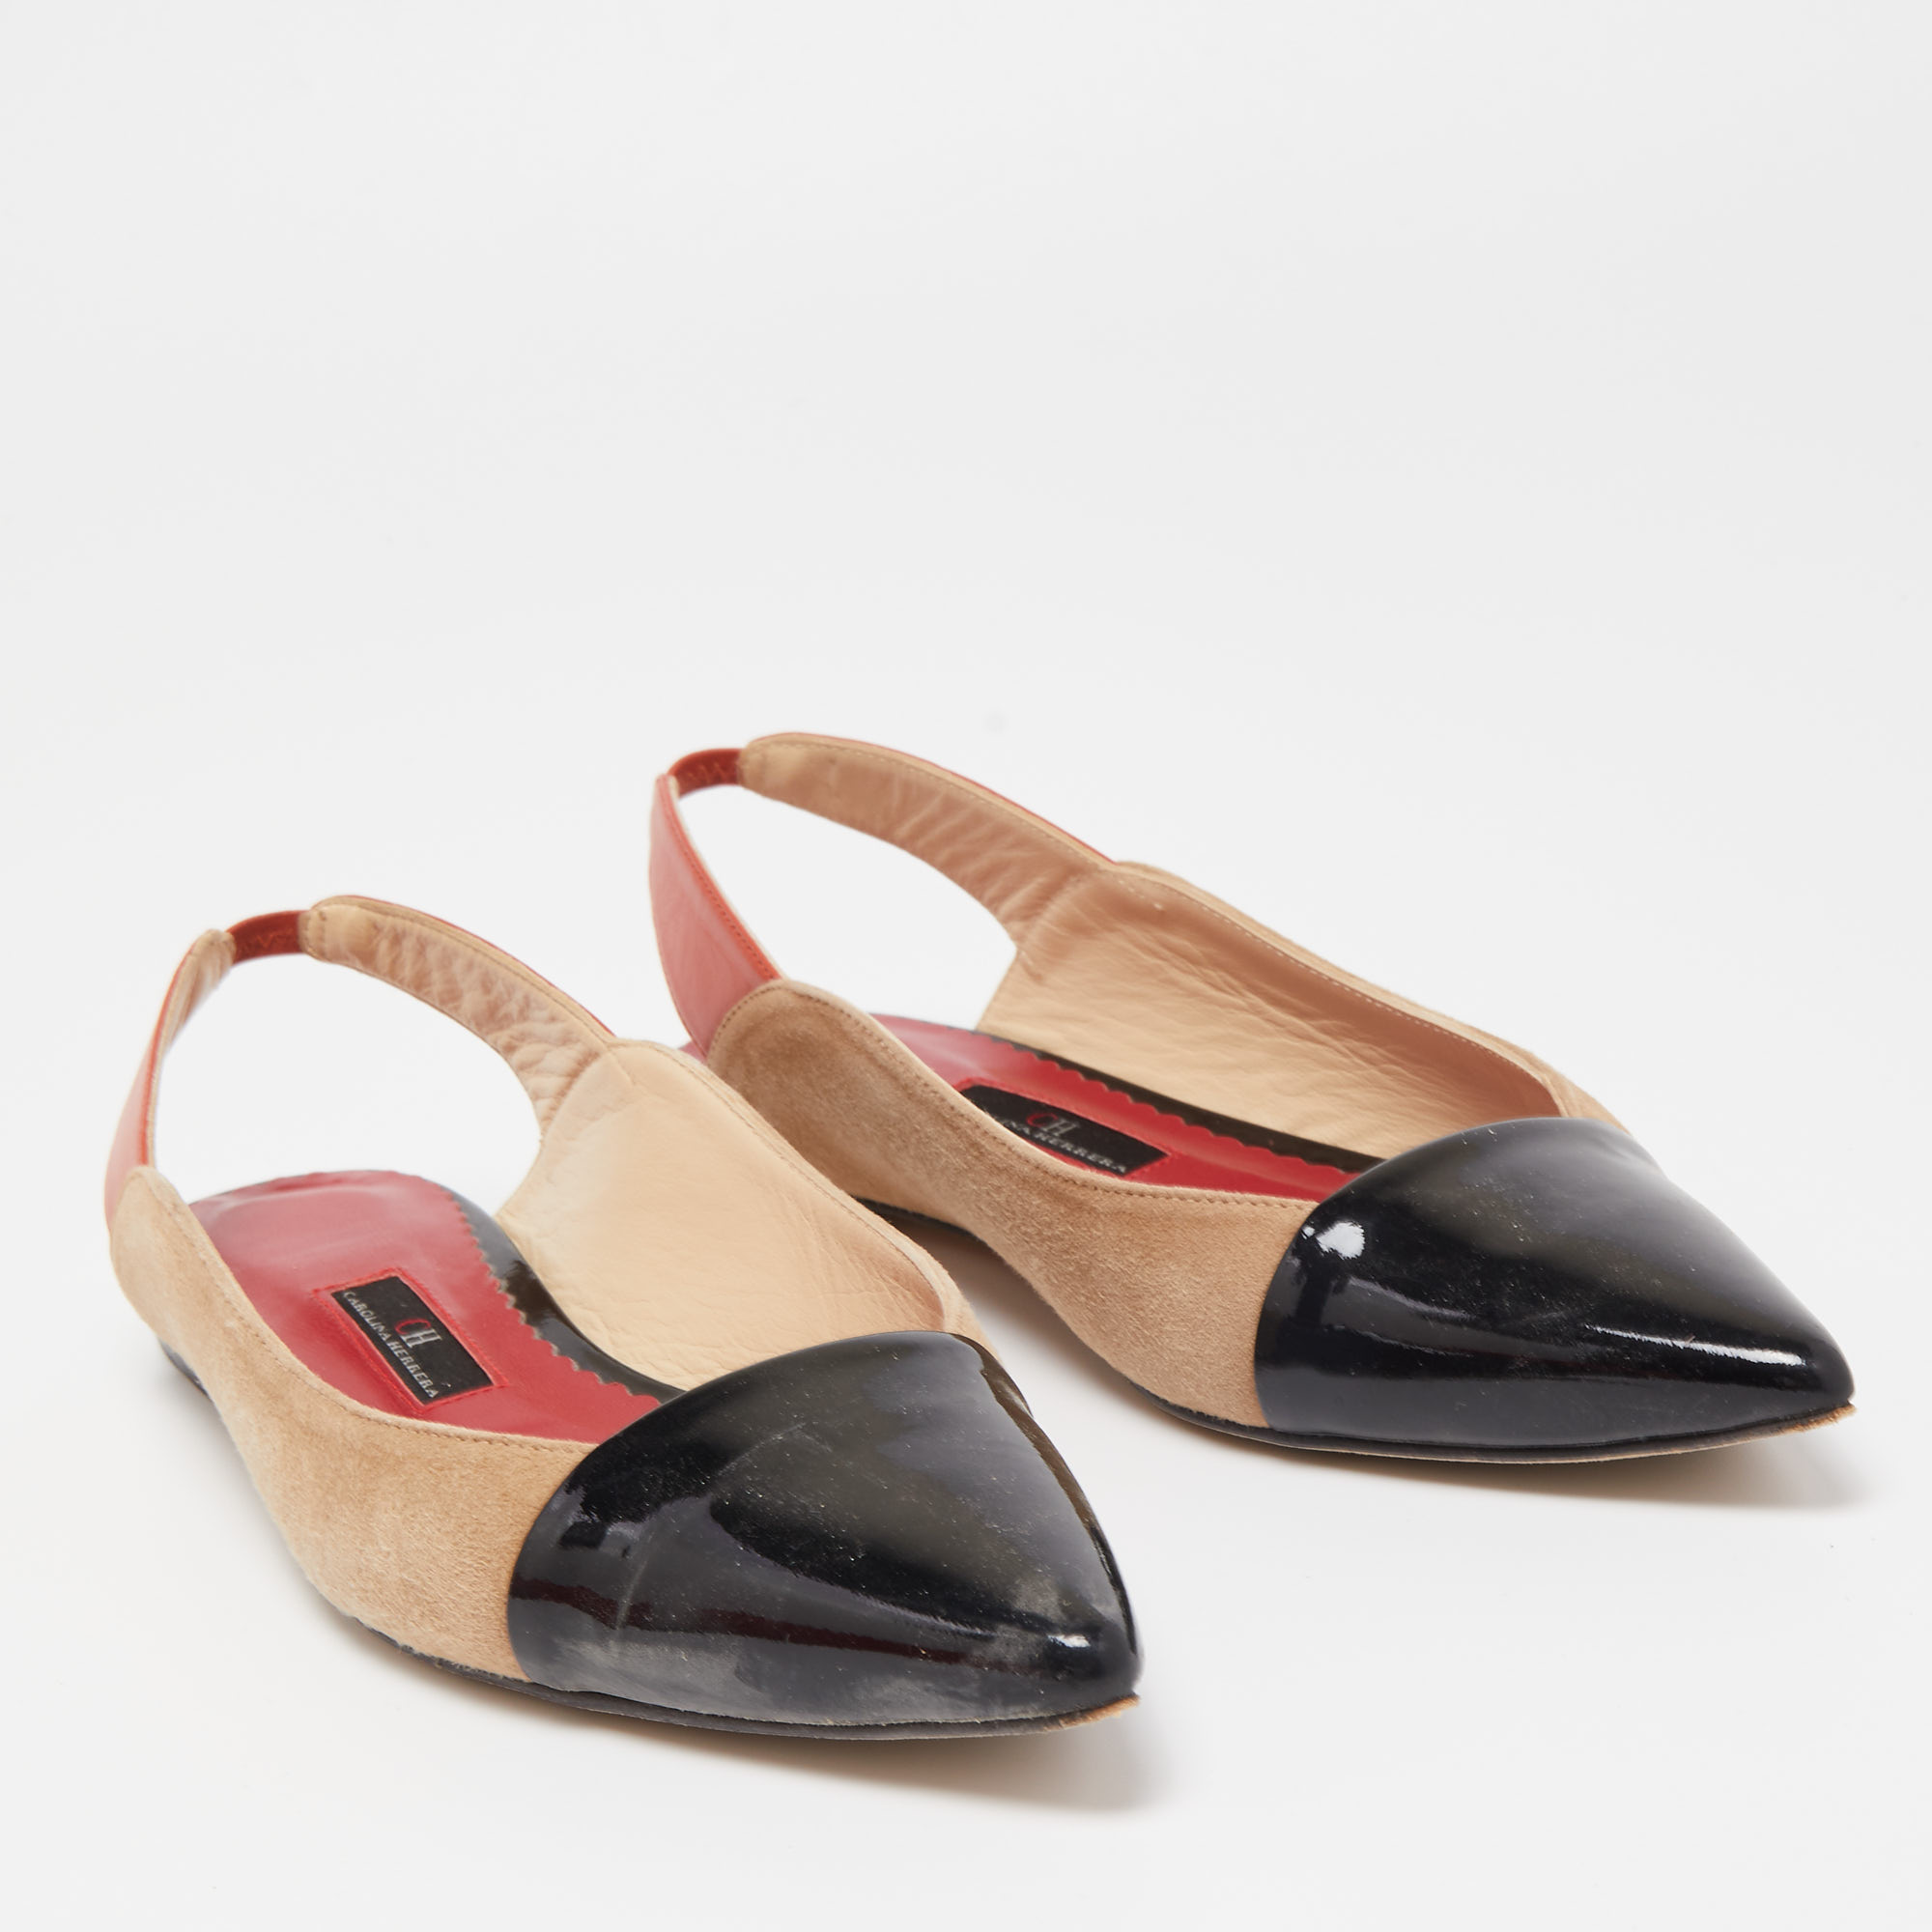 Carolina Herrera Multicolor Suede And Leather Pointed Toe Slingback Flats Size 37